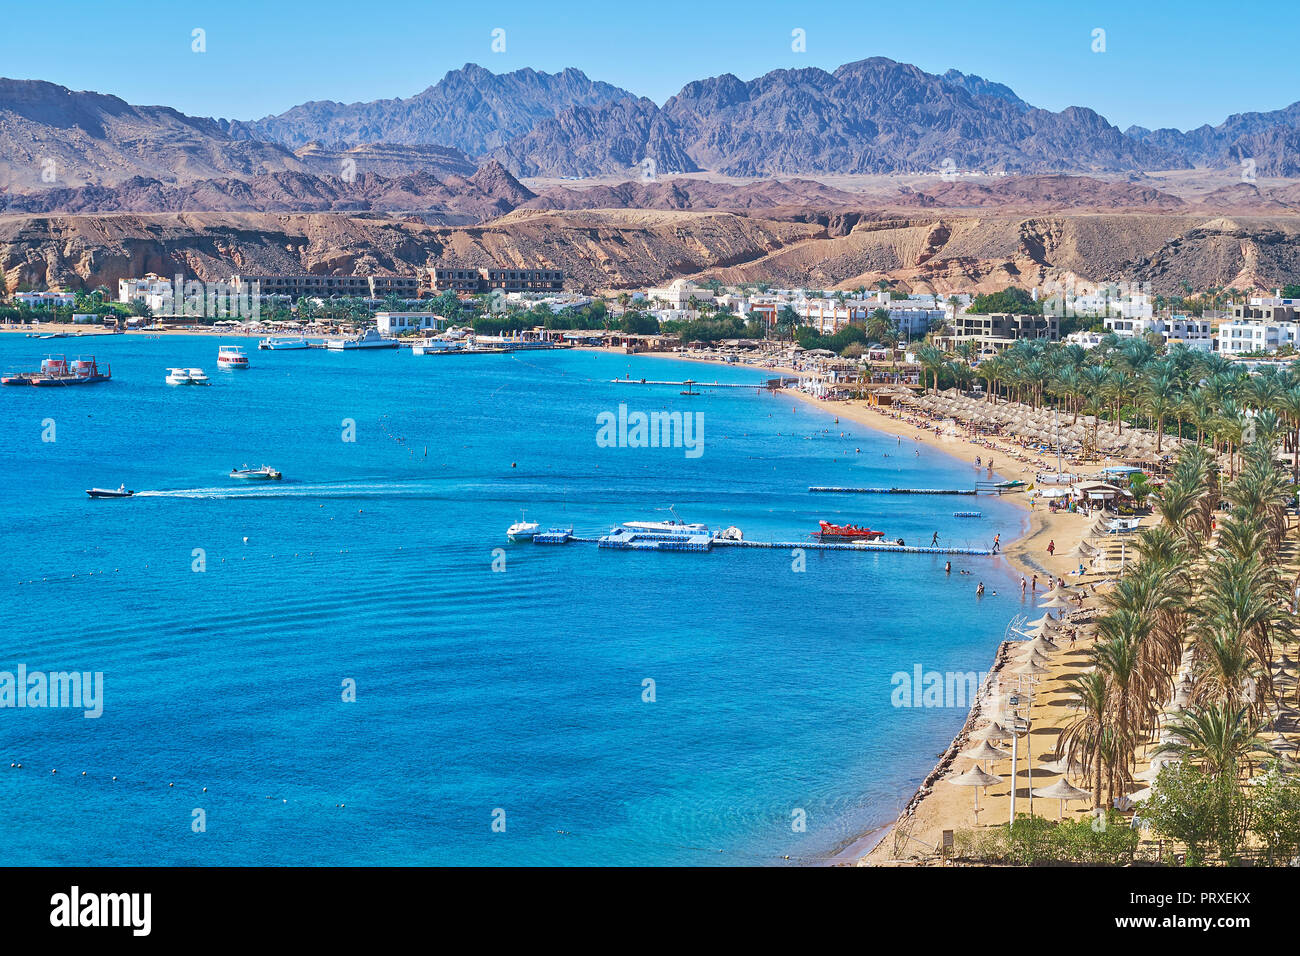 The cozy sand beach of Sharm El Maya is lined with shady palm trees and surrounded by Sinai desert rocks, Sharm El Sheikh, Egypt. Stock Photo